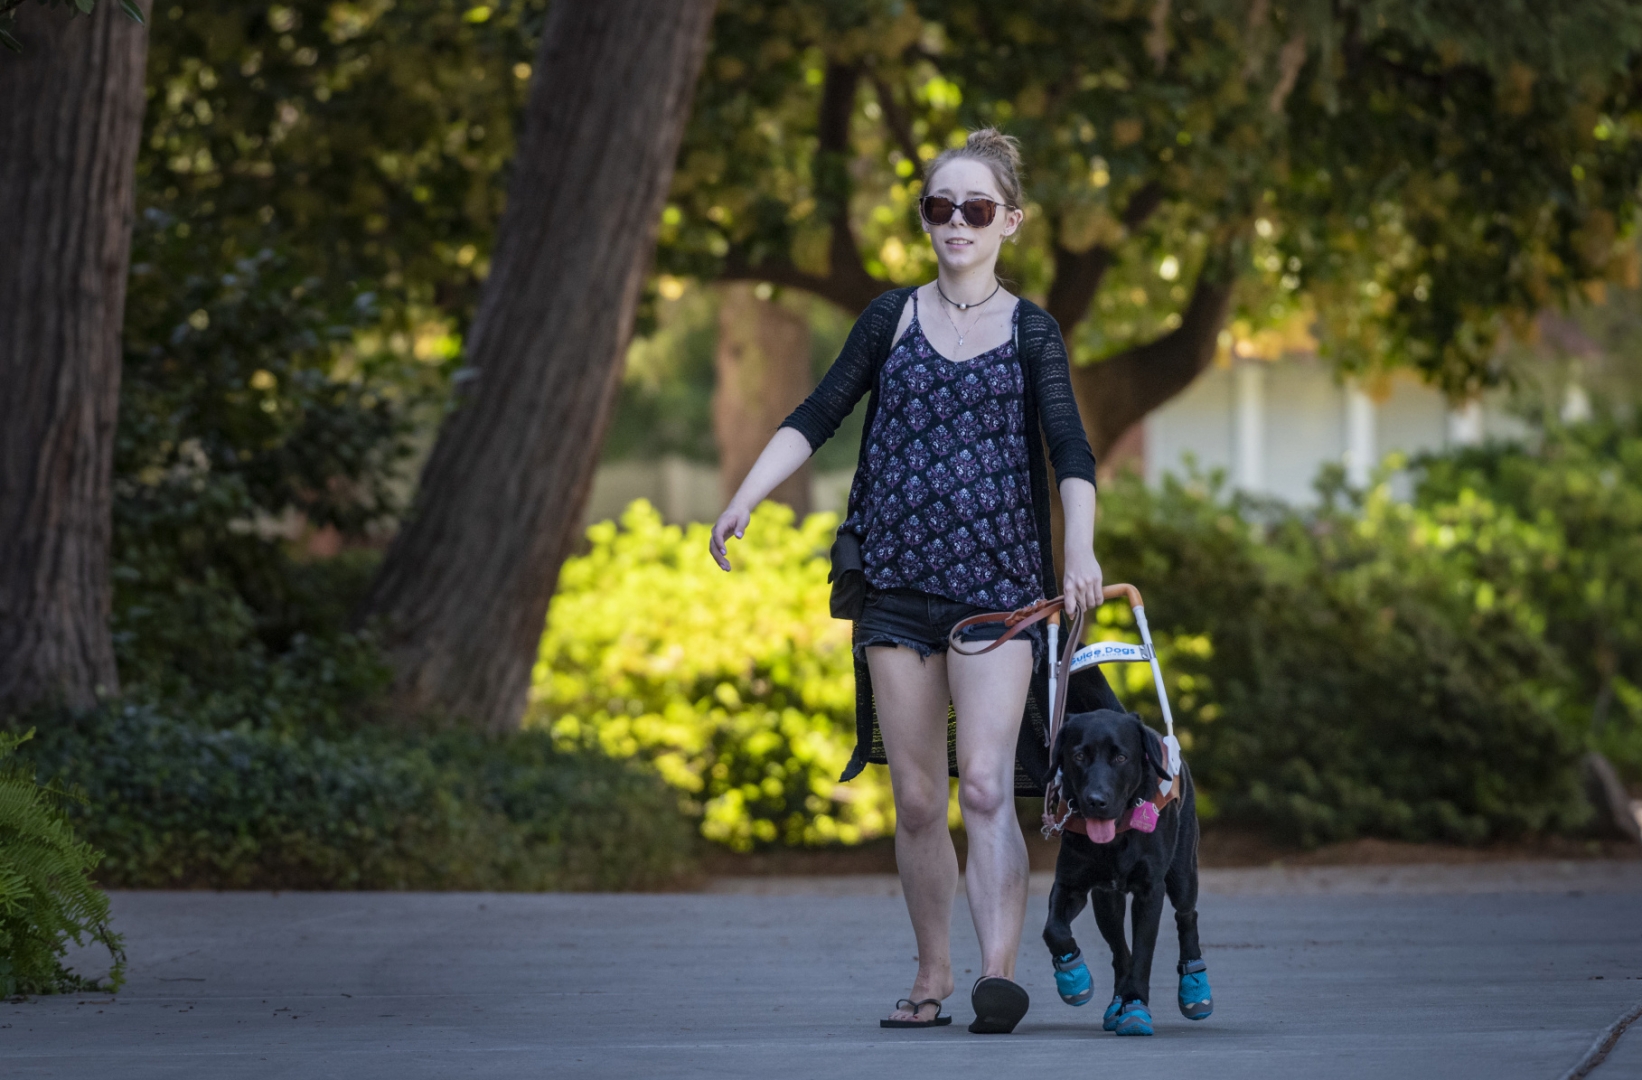 Olivia Merz walks on a campus path holding onto the handle of her Guide Dogs for the Blind companion, a black lab wearing blue booties.